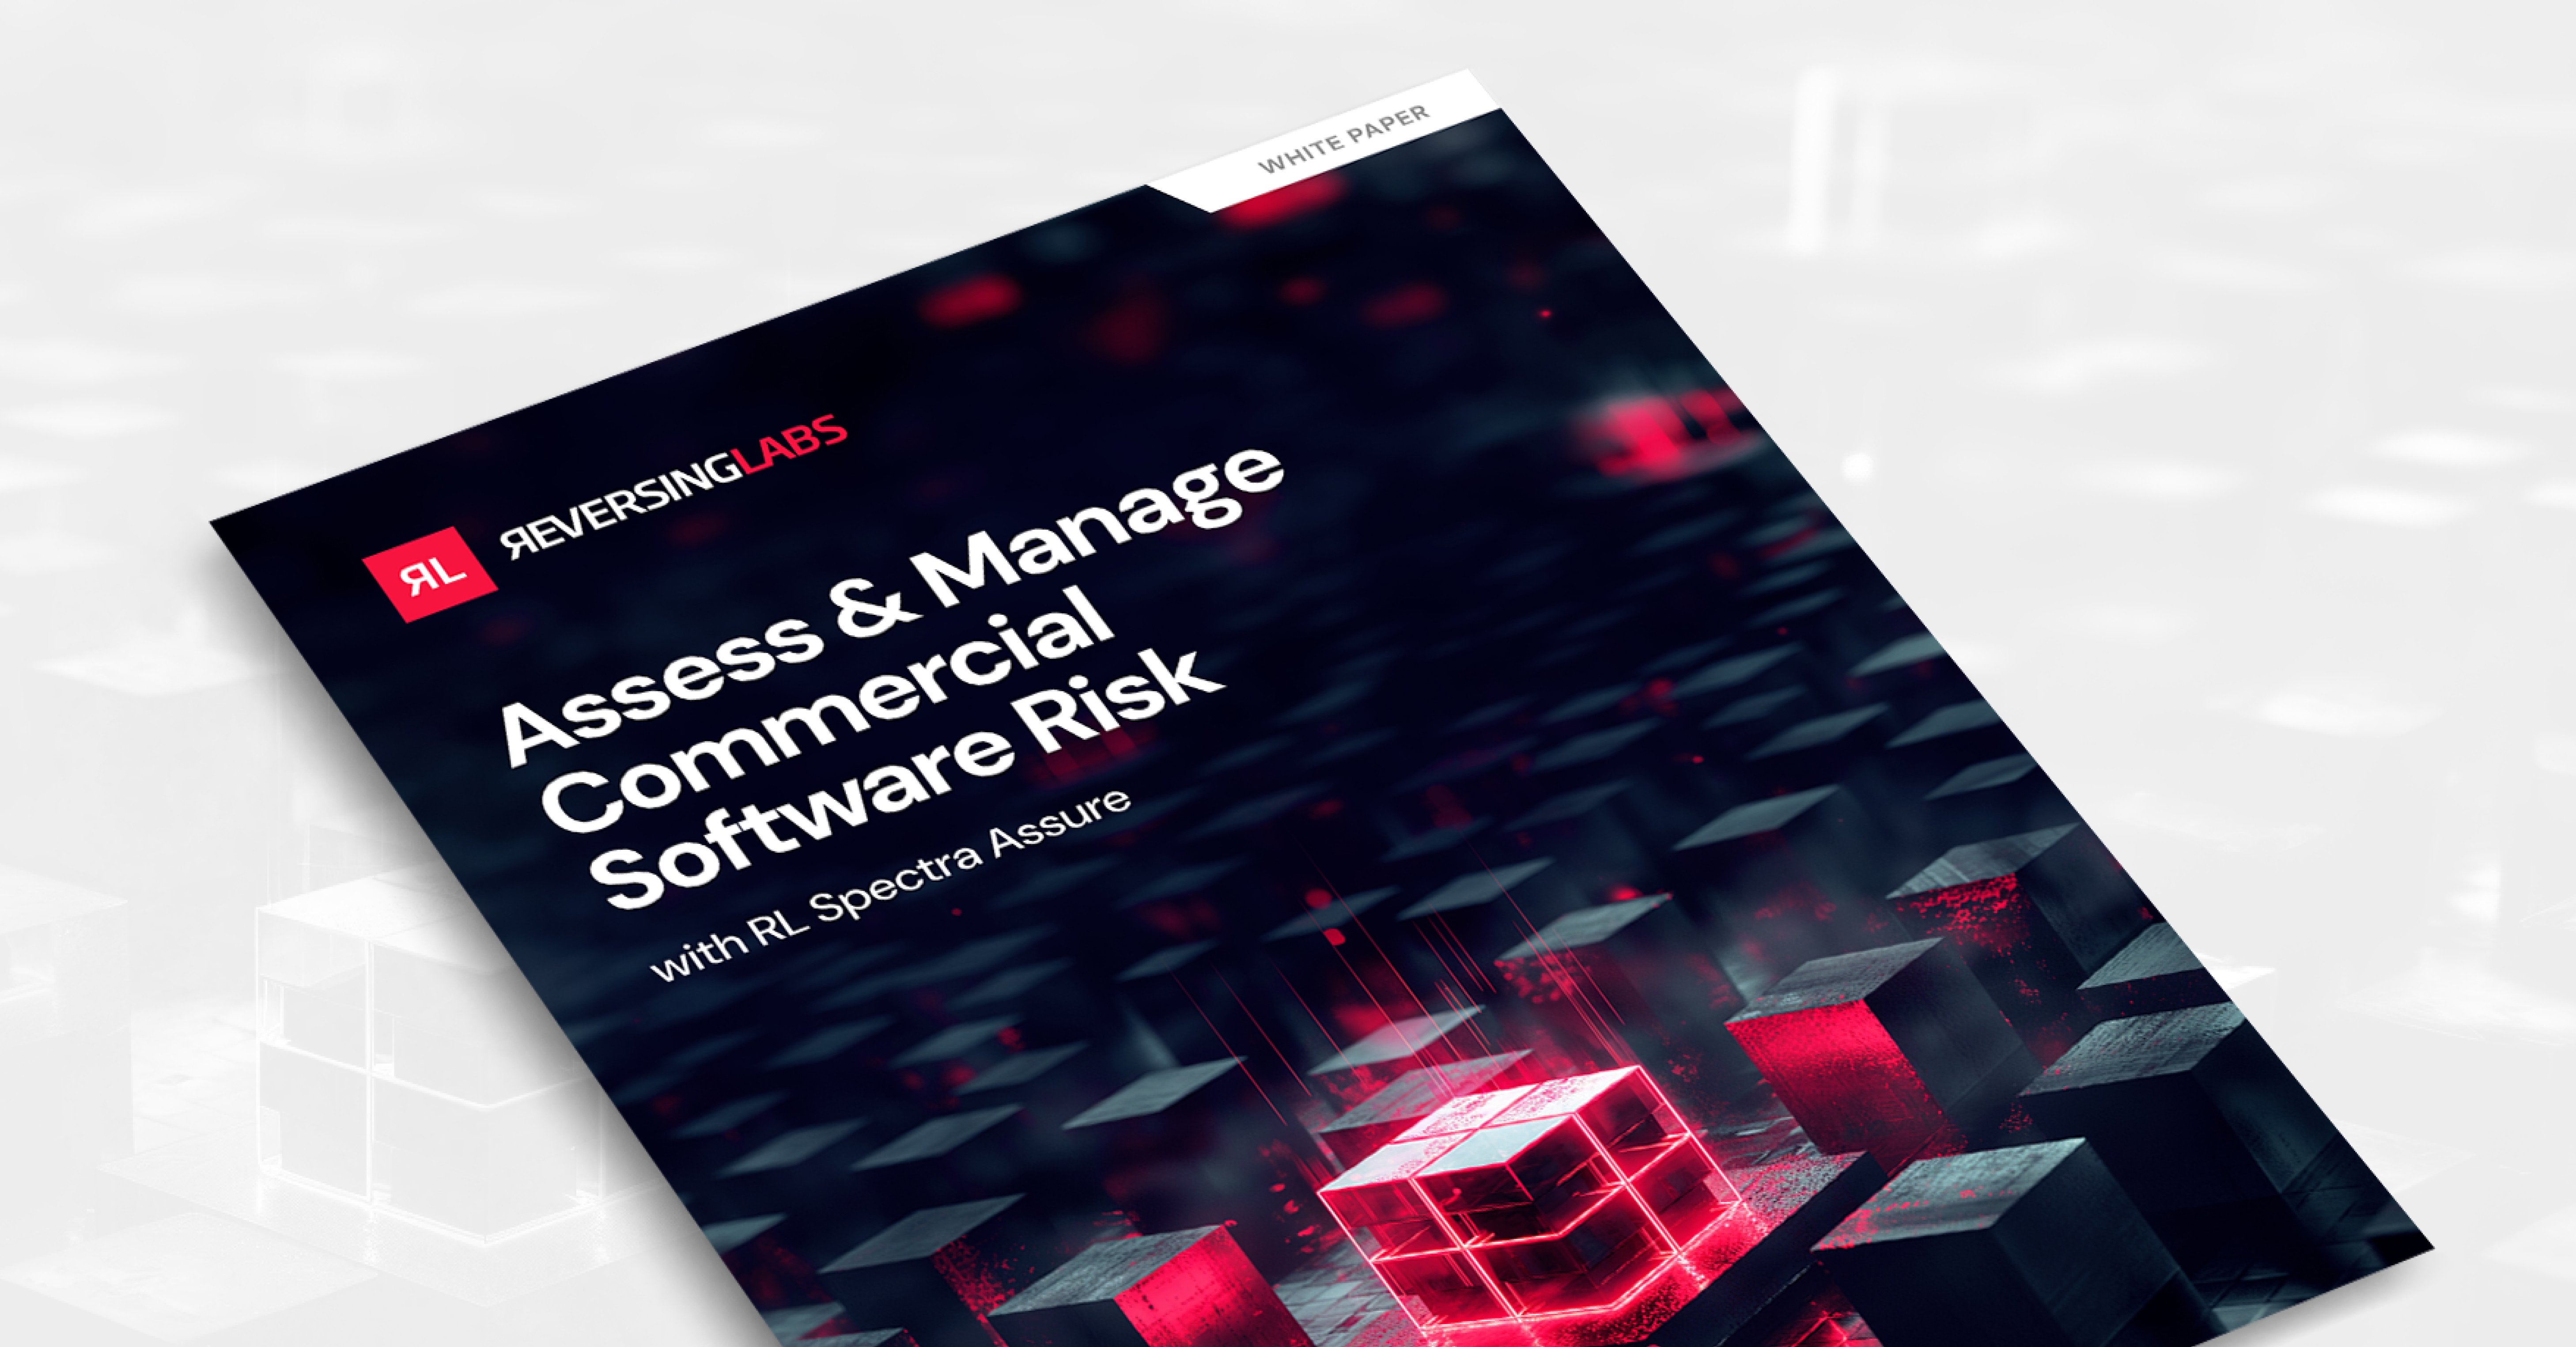 How to assess and manage commercial software risk